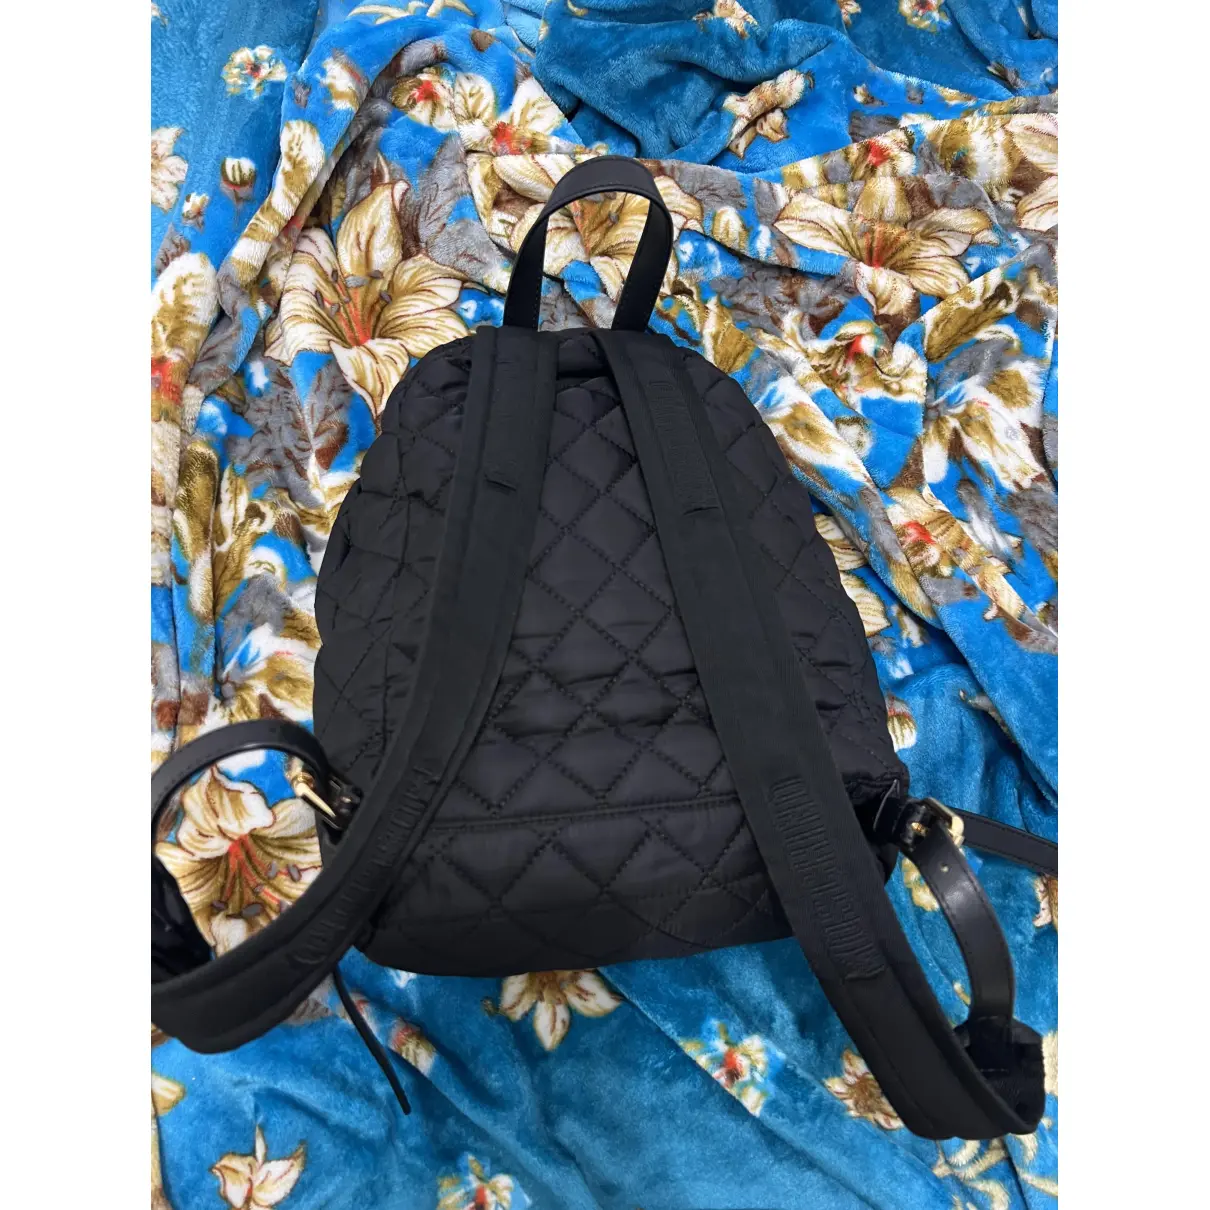 Buy Moschino Cloth backpack online